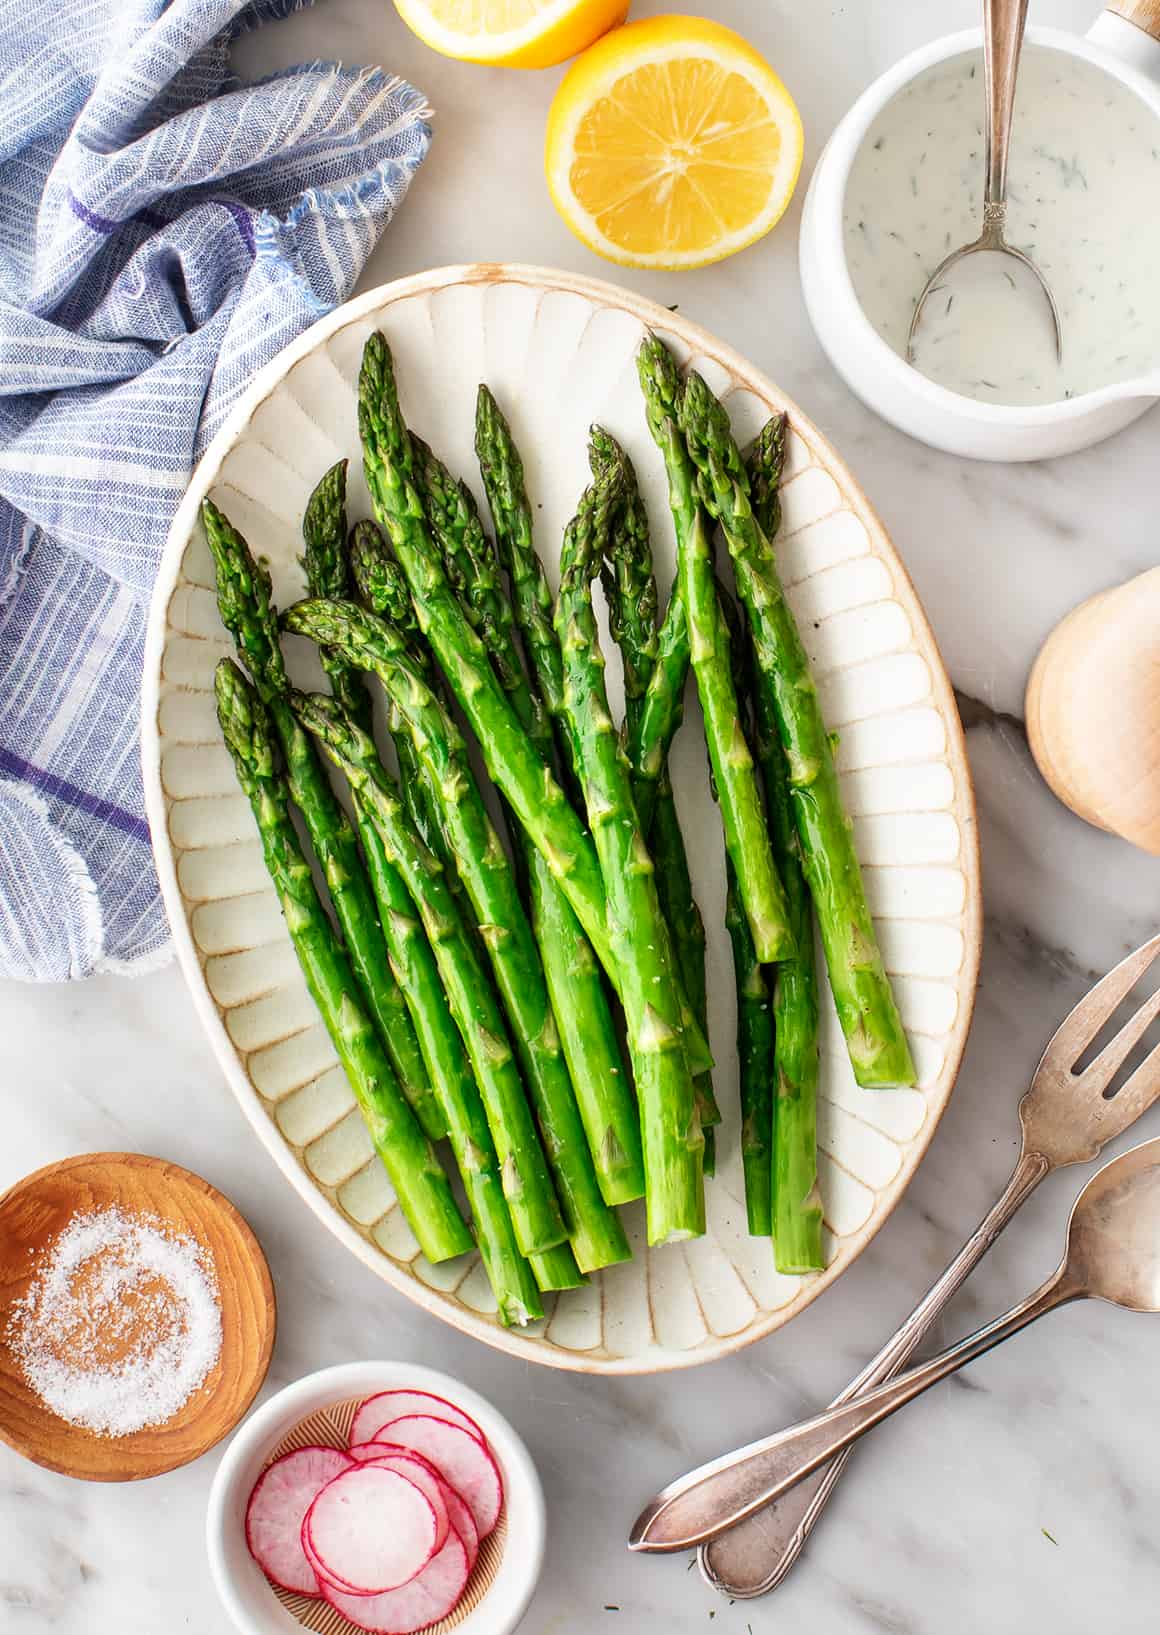 Roasted asparagus on a plate with spices and a sauce on the side.